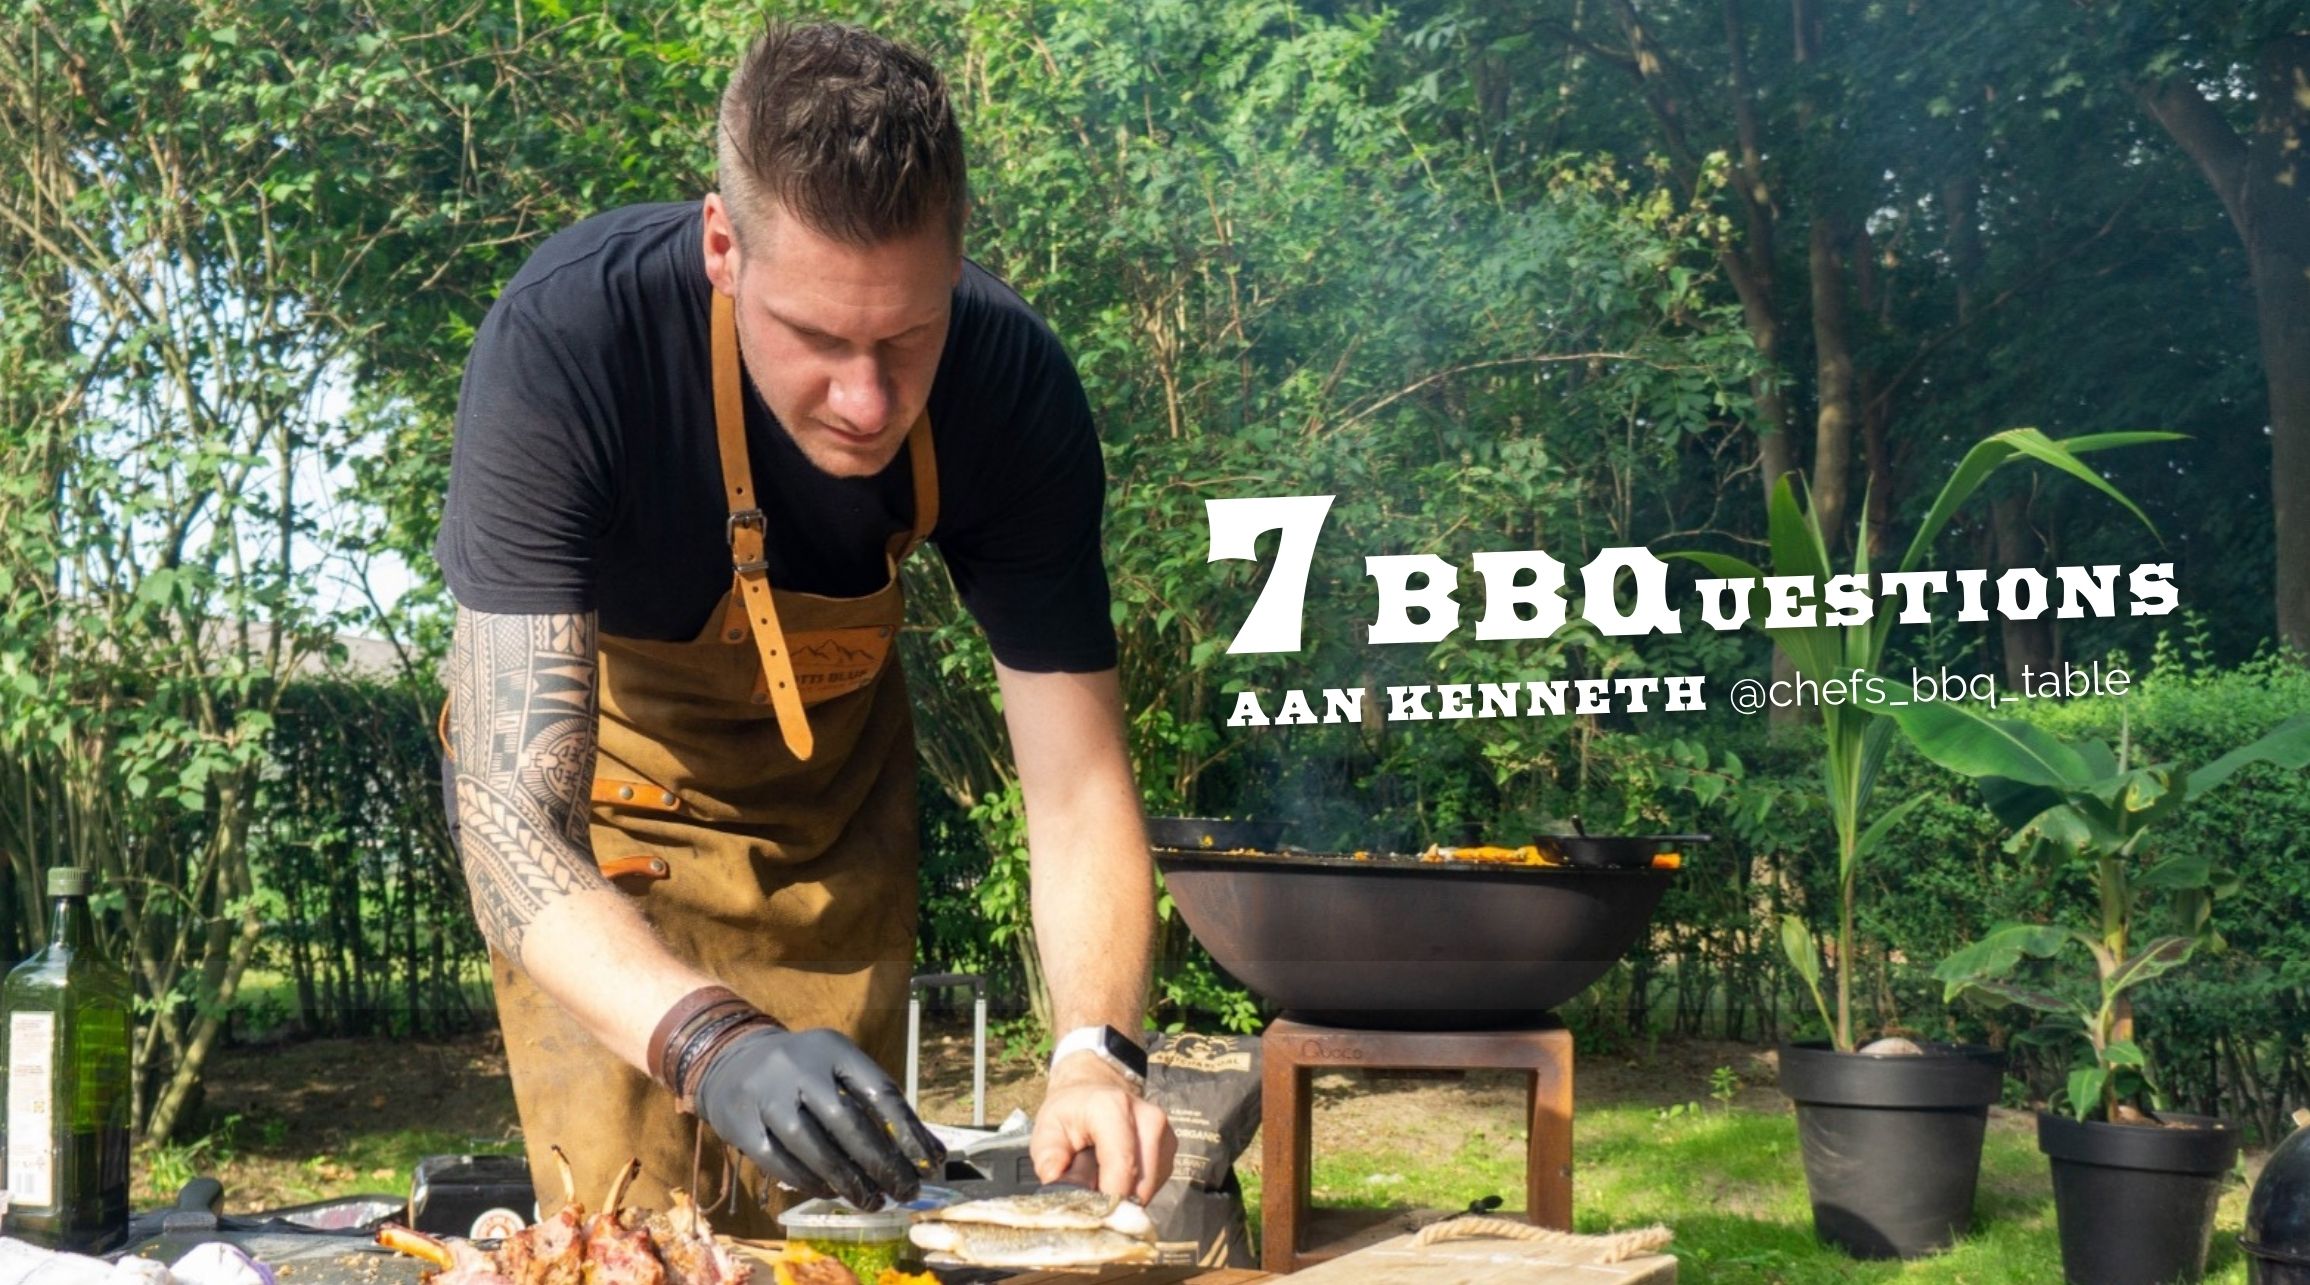 7 BBQuestions aan Kenneth, @chefs_bbq_table